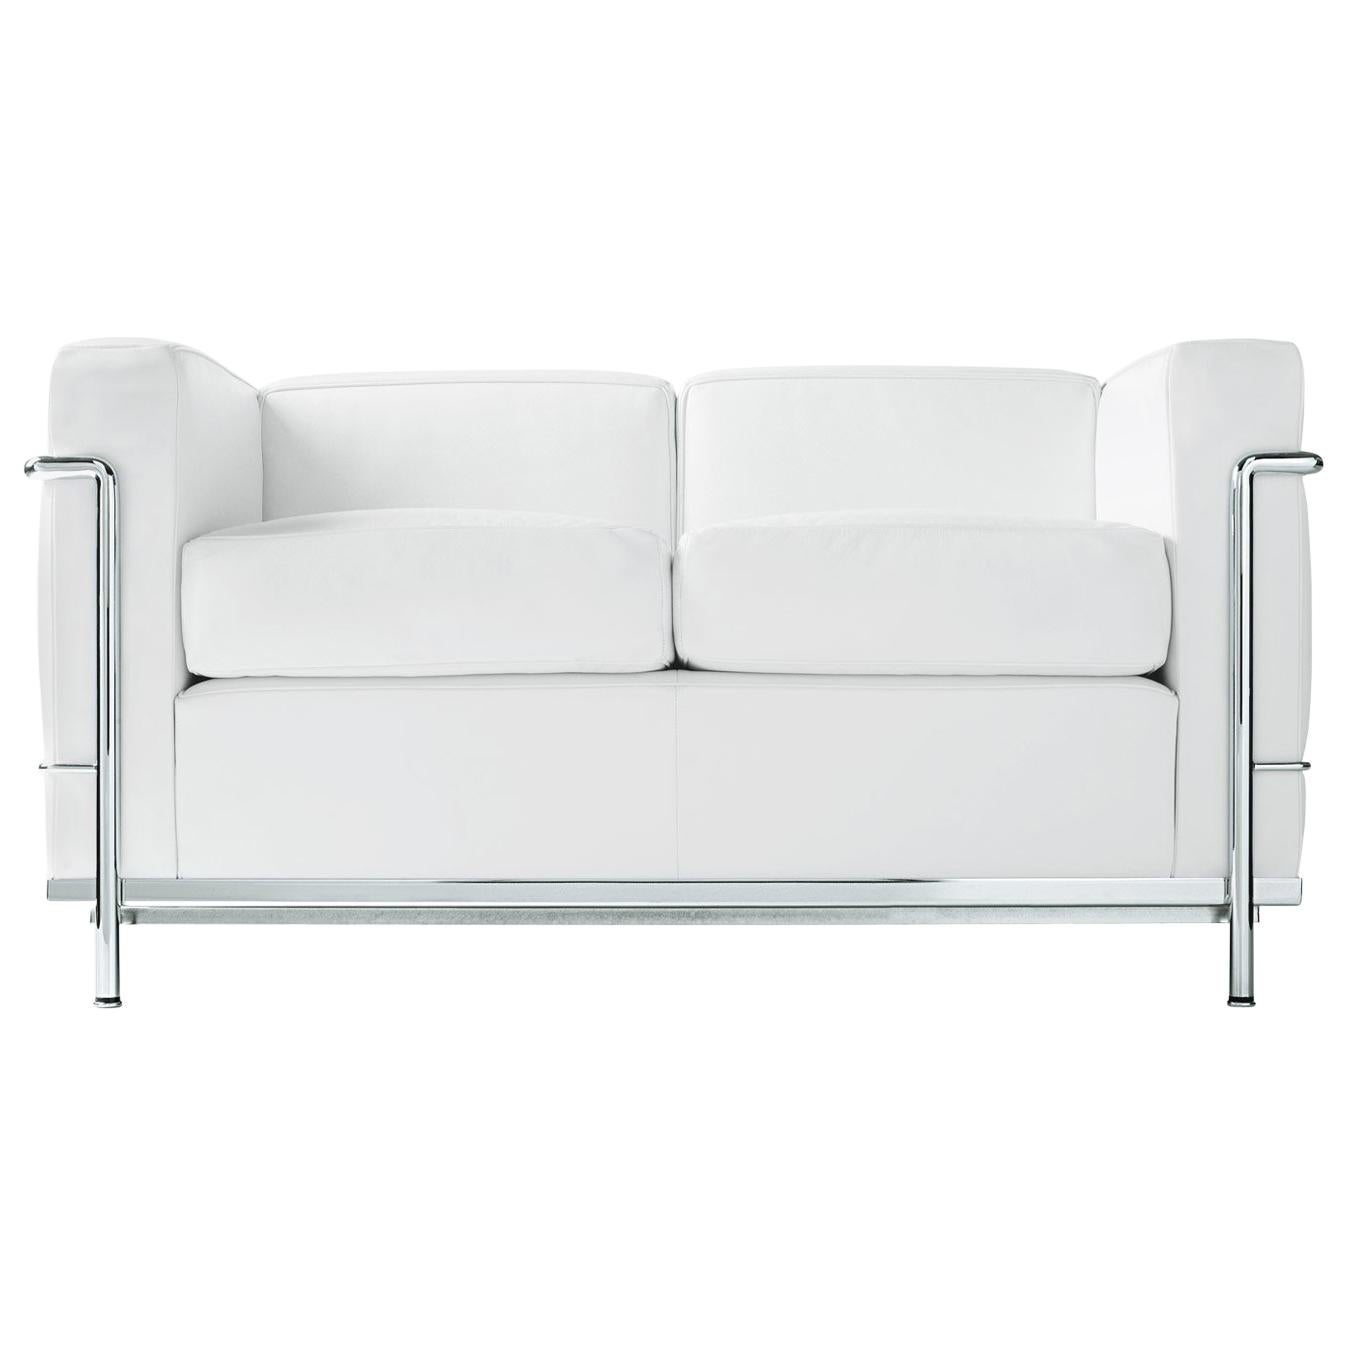 Contemporary Le Corbusier, Pierre Jeanneret, Charlotte Perriand LC2 Two-Seat Sofa by Cassina